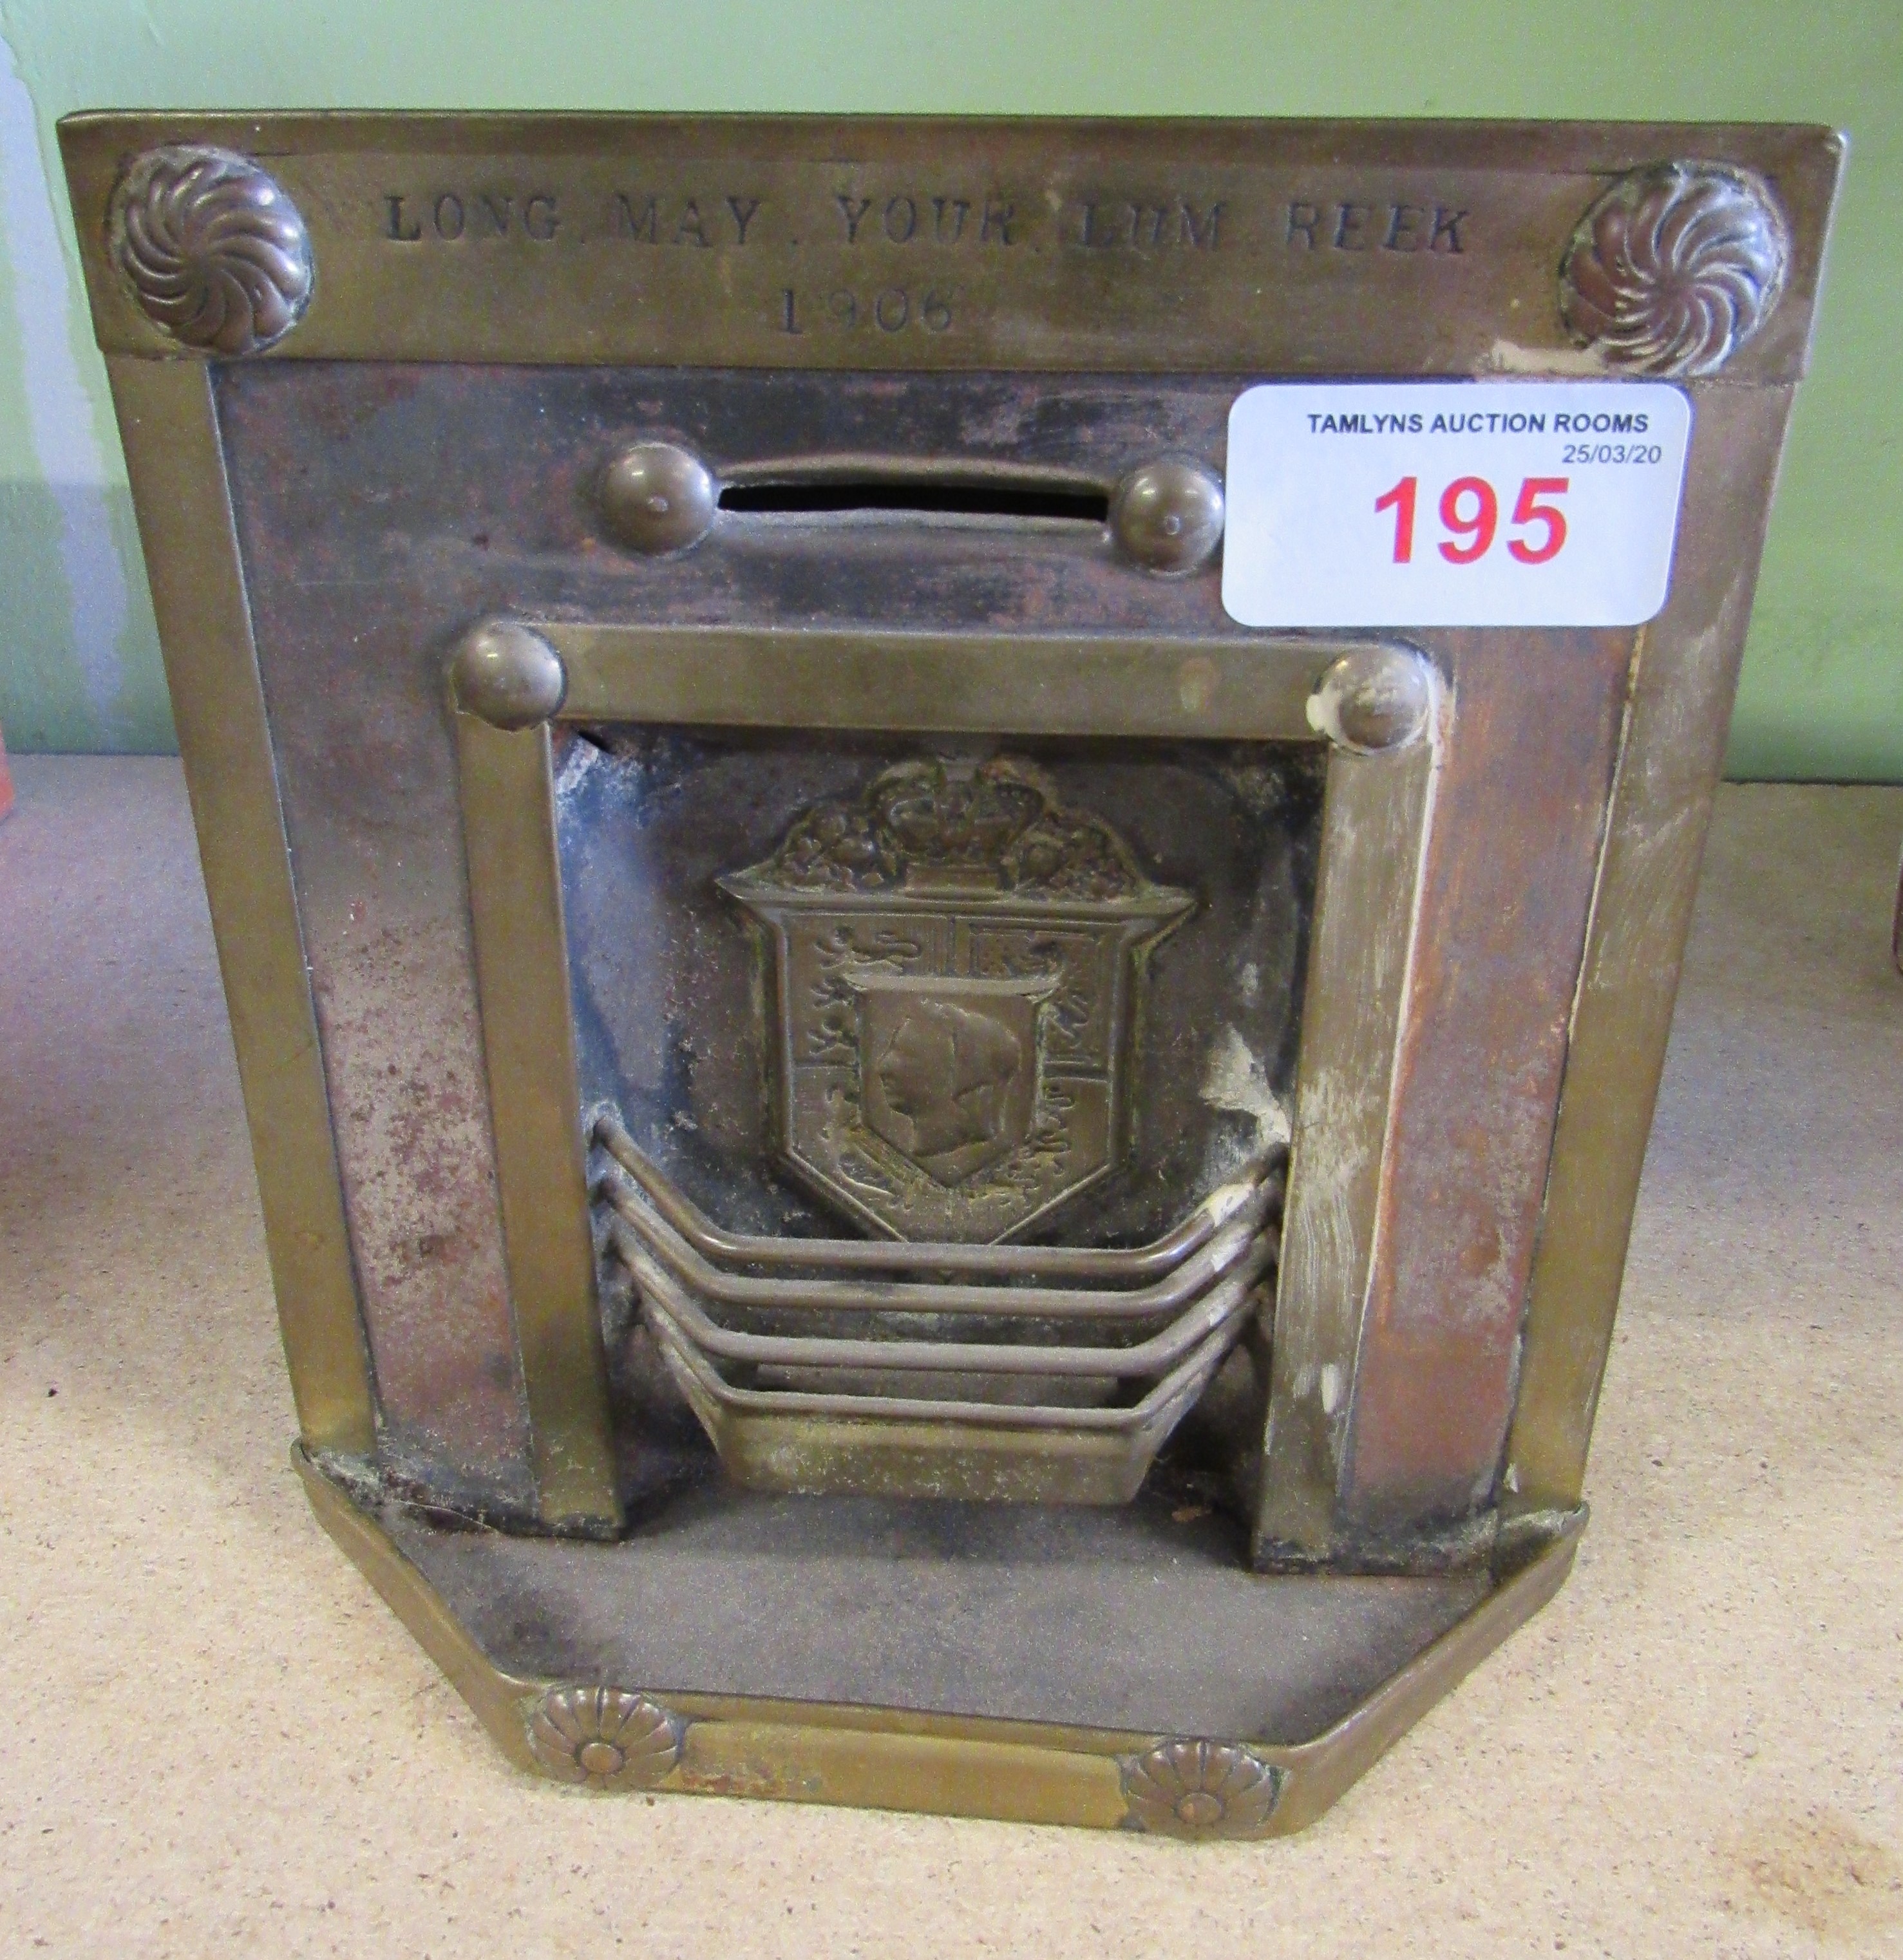 A tin plate money box of a fireplace 'LONG MAY YOUR LUM REEK 1906'